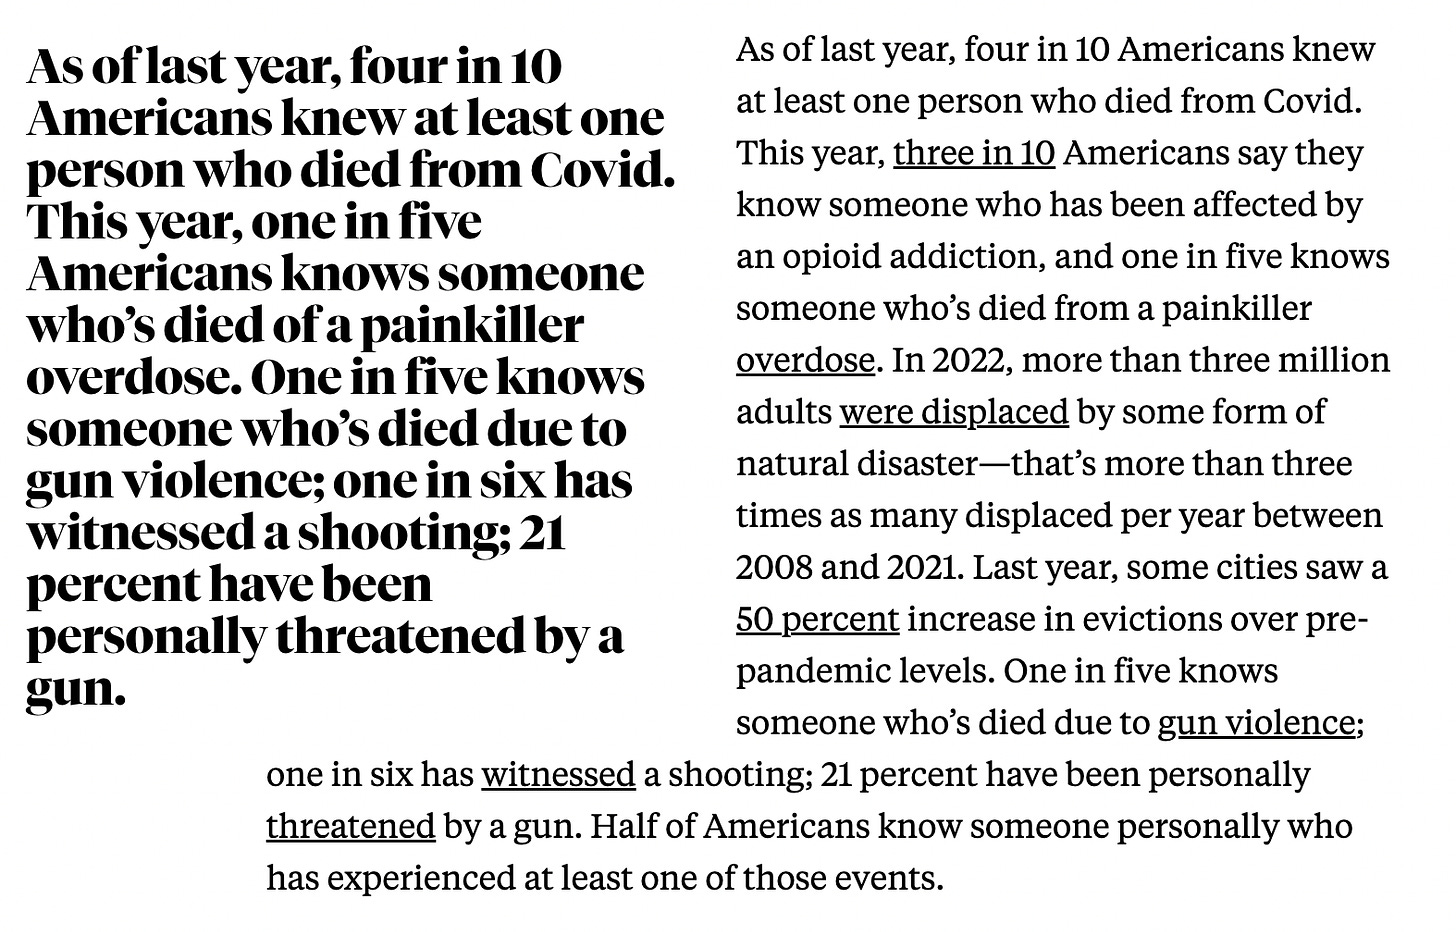 As of last year, four in 10 Americans knew at least one person who died from Covid. This year, three in 10 Americans say they know someone who has been affected by an opioid addiction, and one in five knows someone who’s died from a painkiller overdose. In 2022, more than three million adults were displaced by some form of natural disaster—that’s more than three times as many displaced per year between 2008 and 2021. Last year, some cities saw a 50 percent increase in evictions over pre-pandemic levels. One in five knows someone who’s died due to gun violence; one in six has witnessed a shooting; 21 percent have been personally threatened by a gun. Half of Americans know someone personally who has experienced at least one of those events.